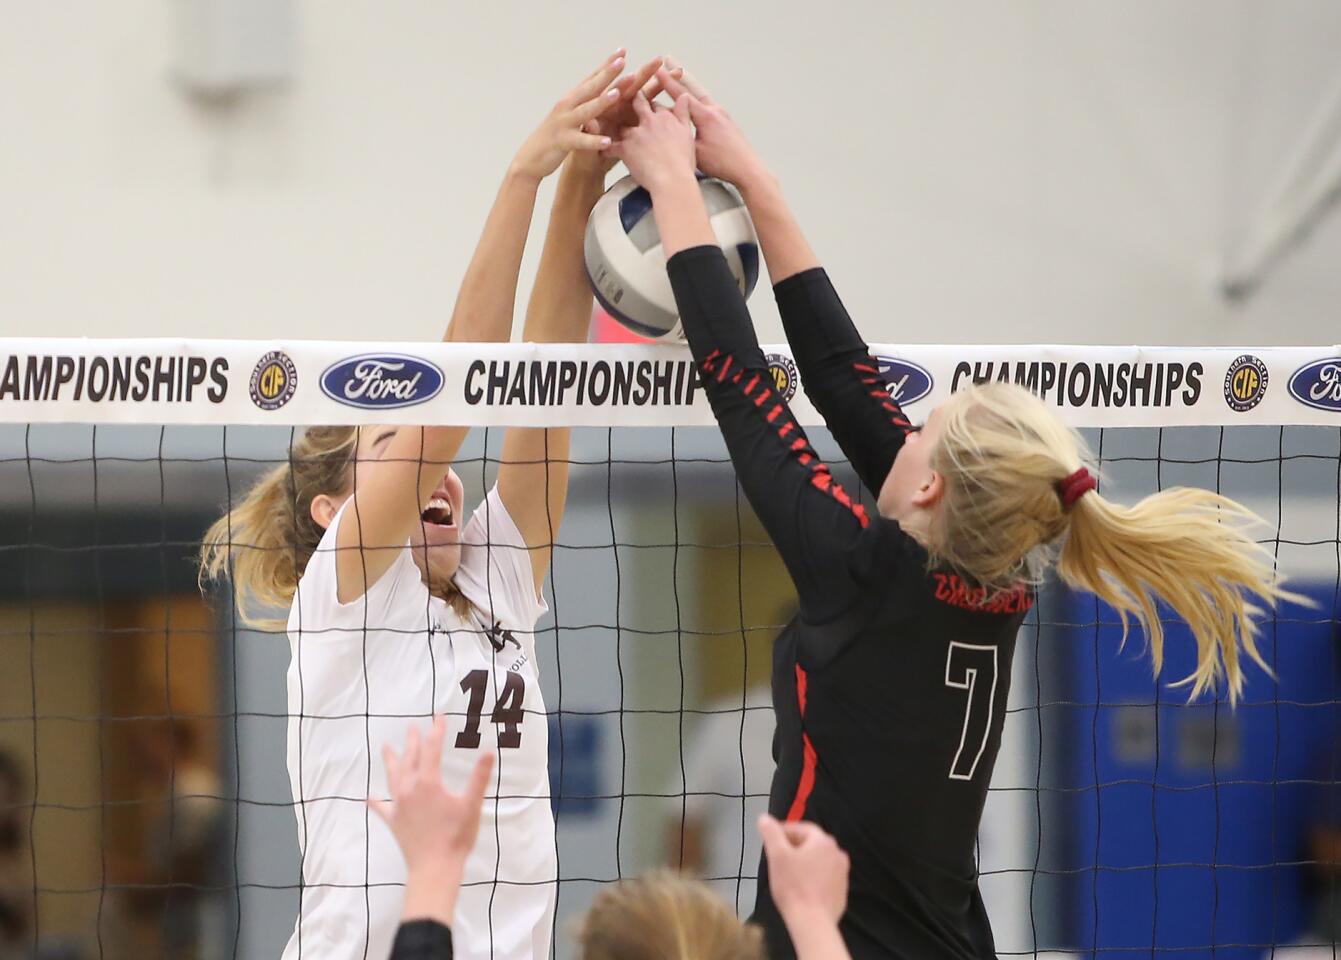 Laguna Beach High's Piper Naess (14) jousts at the net with Sun Valley Village Christian's Kendall Jensen in the CIF Southern Section Division 3 championship match at Cerritos College on Saturday.